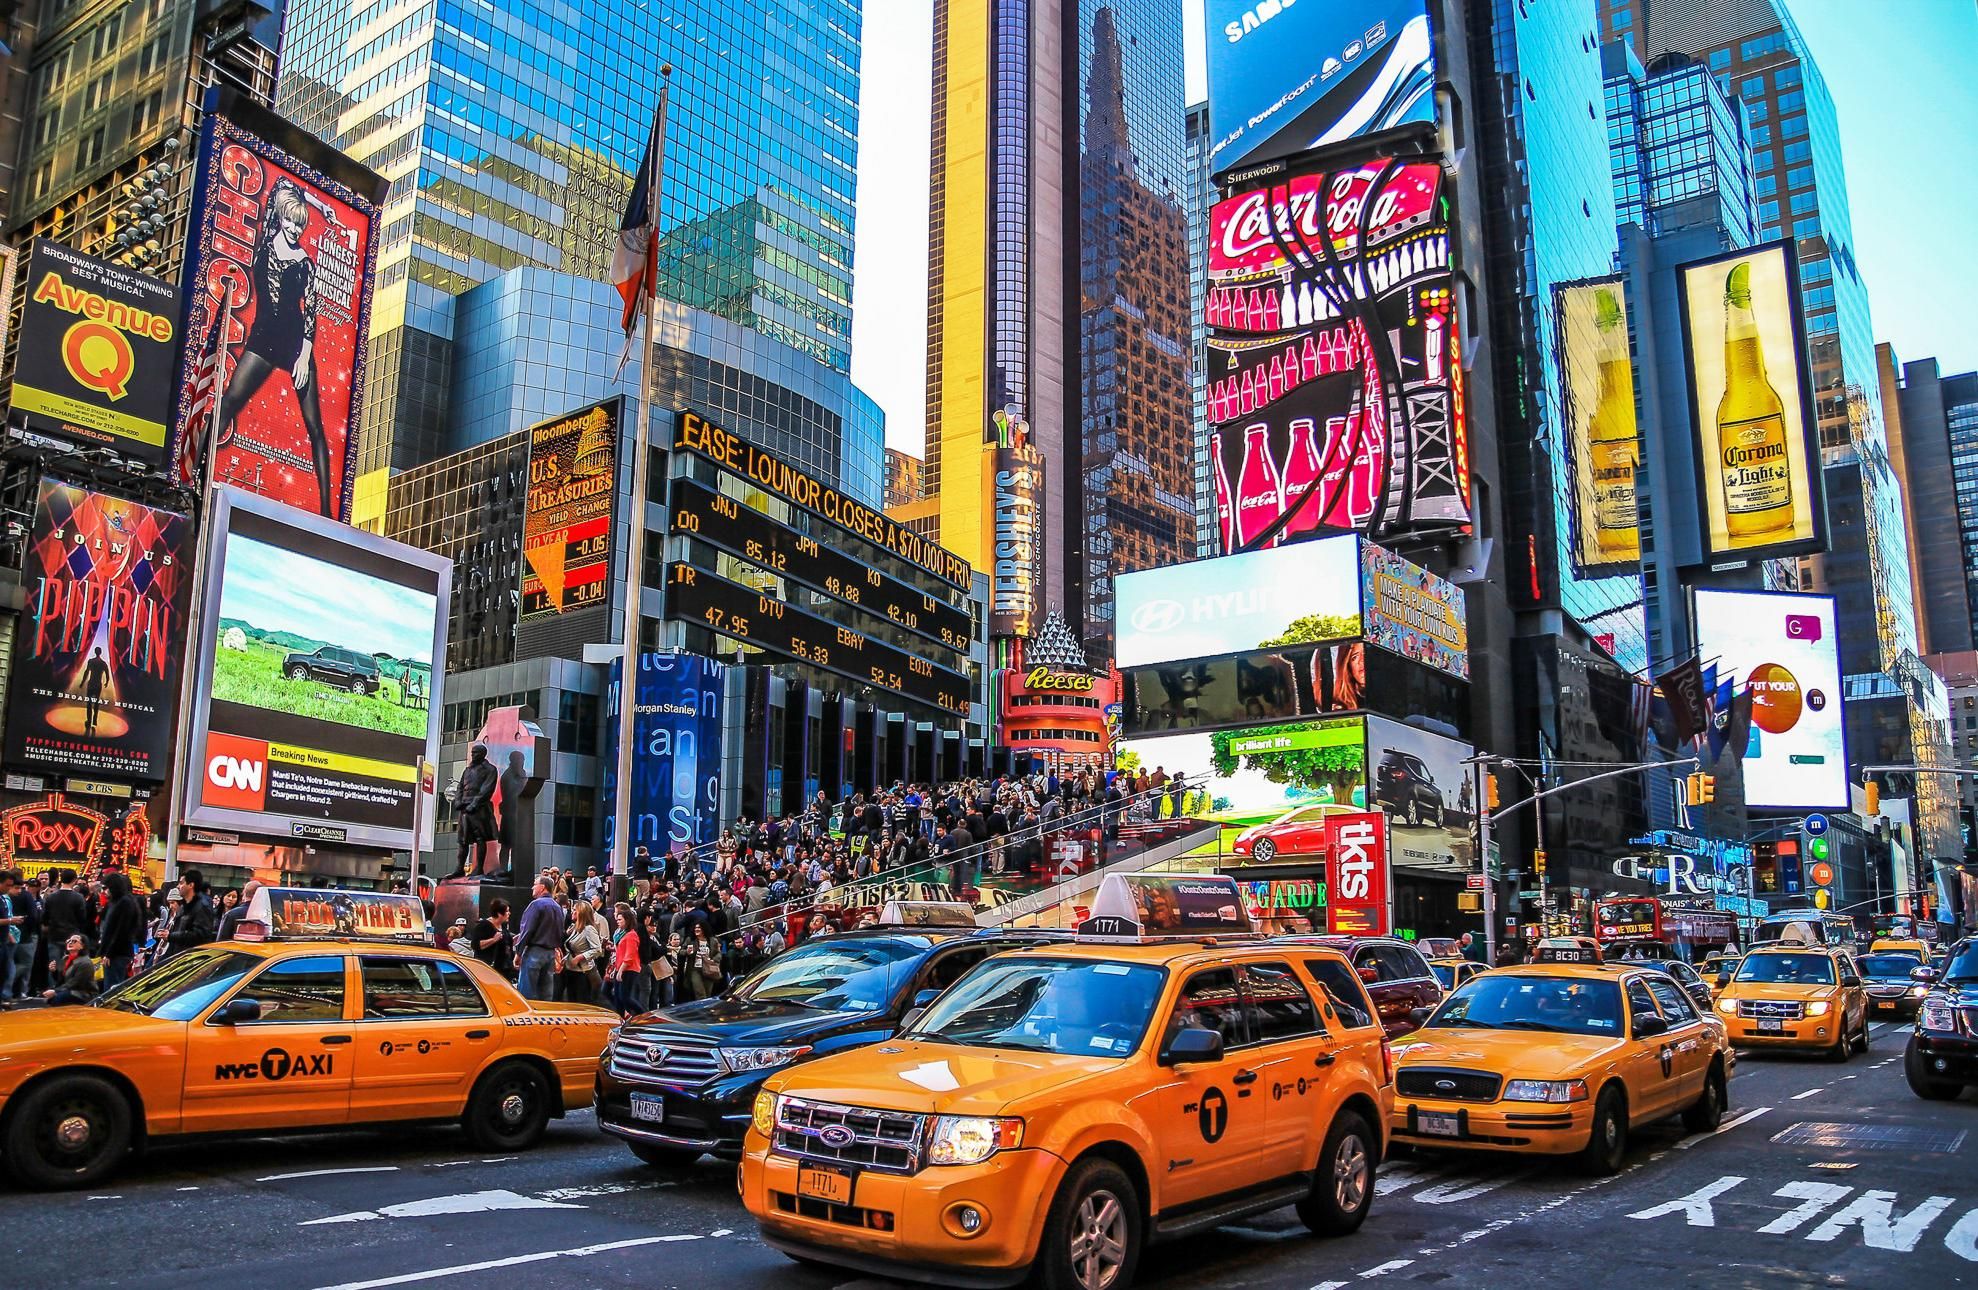 Top 7 reasons to stay at the New York Marriott Marquis for #ASE19